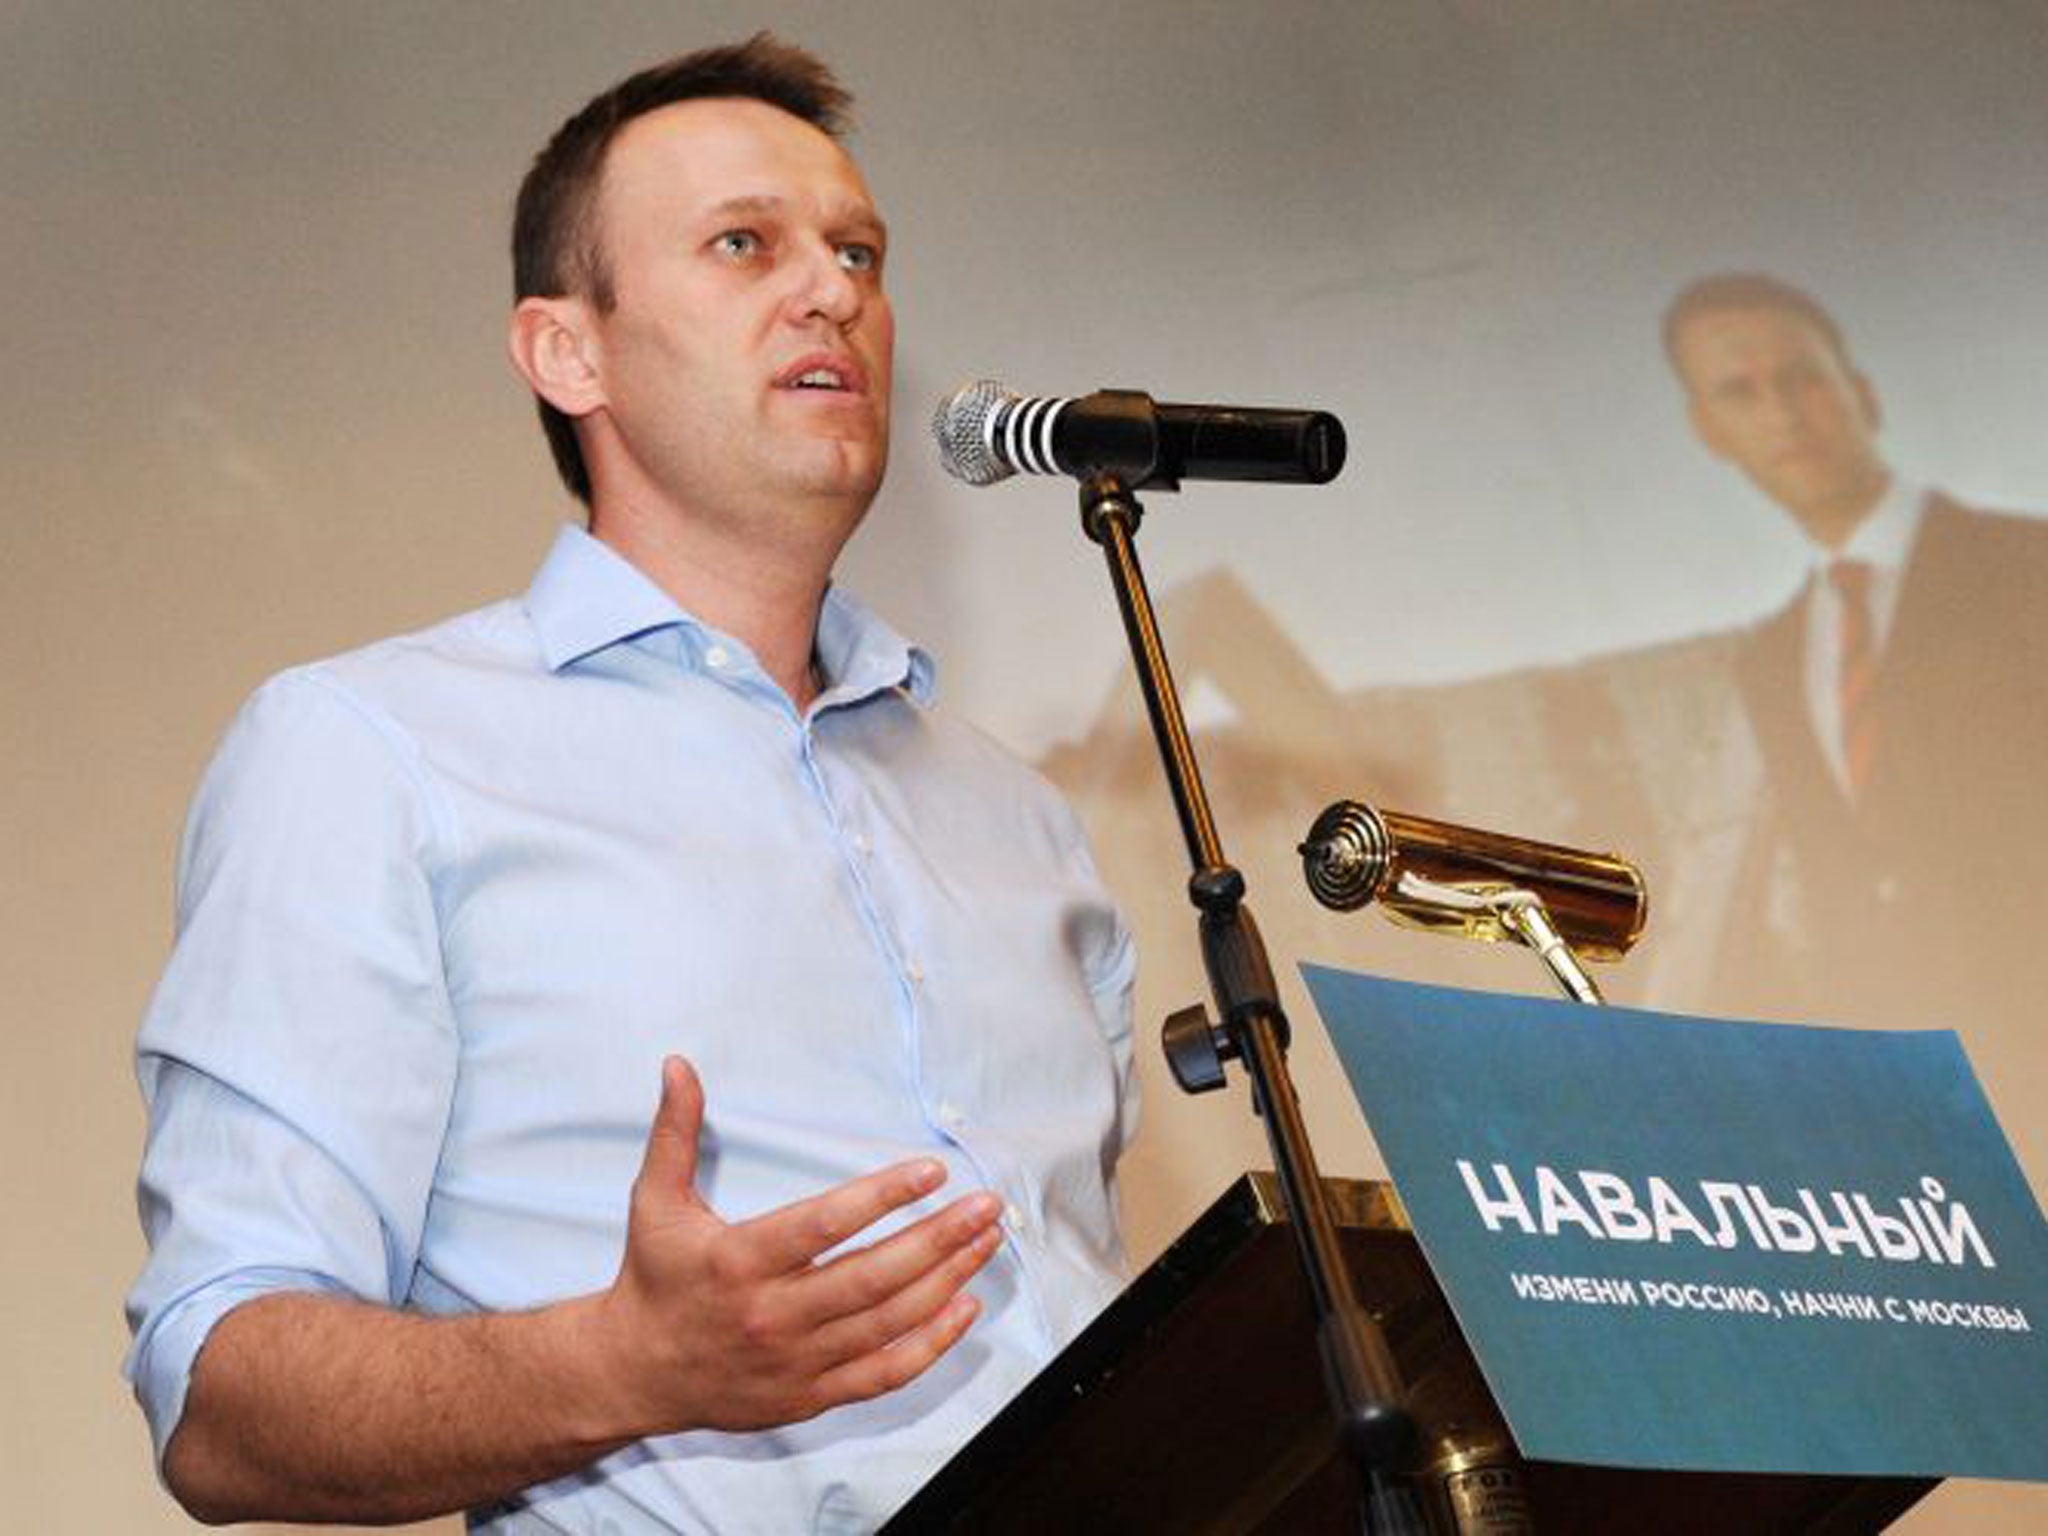 The opposition politician Alexei Navalny launched his campaign to be elected mayor of Moscow on Monday